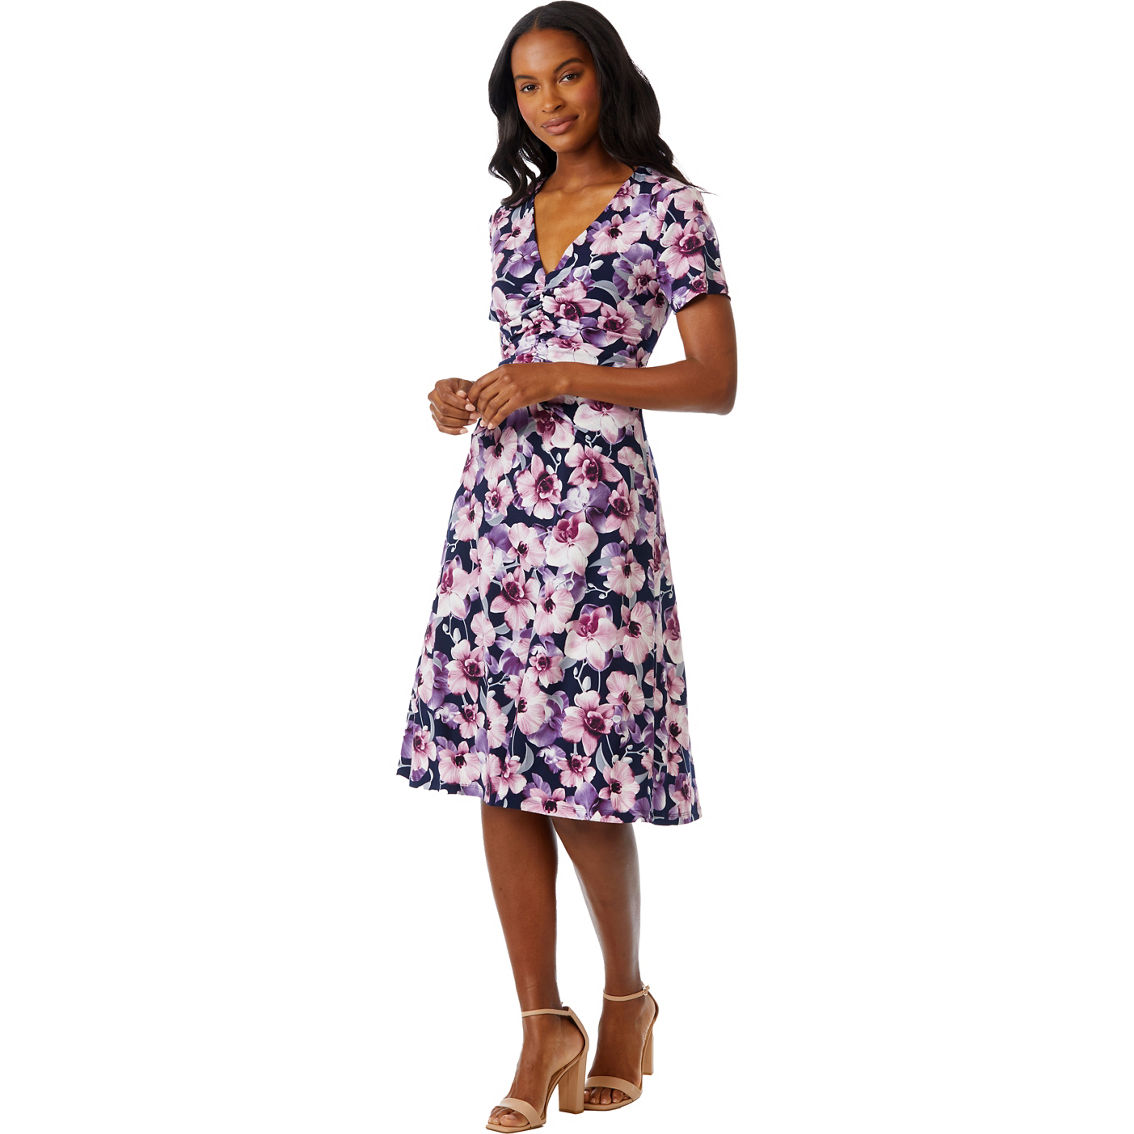 Connected Apparel Floral Dress - Image 3 of 3